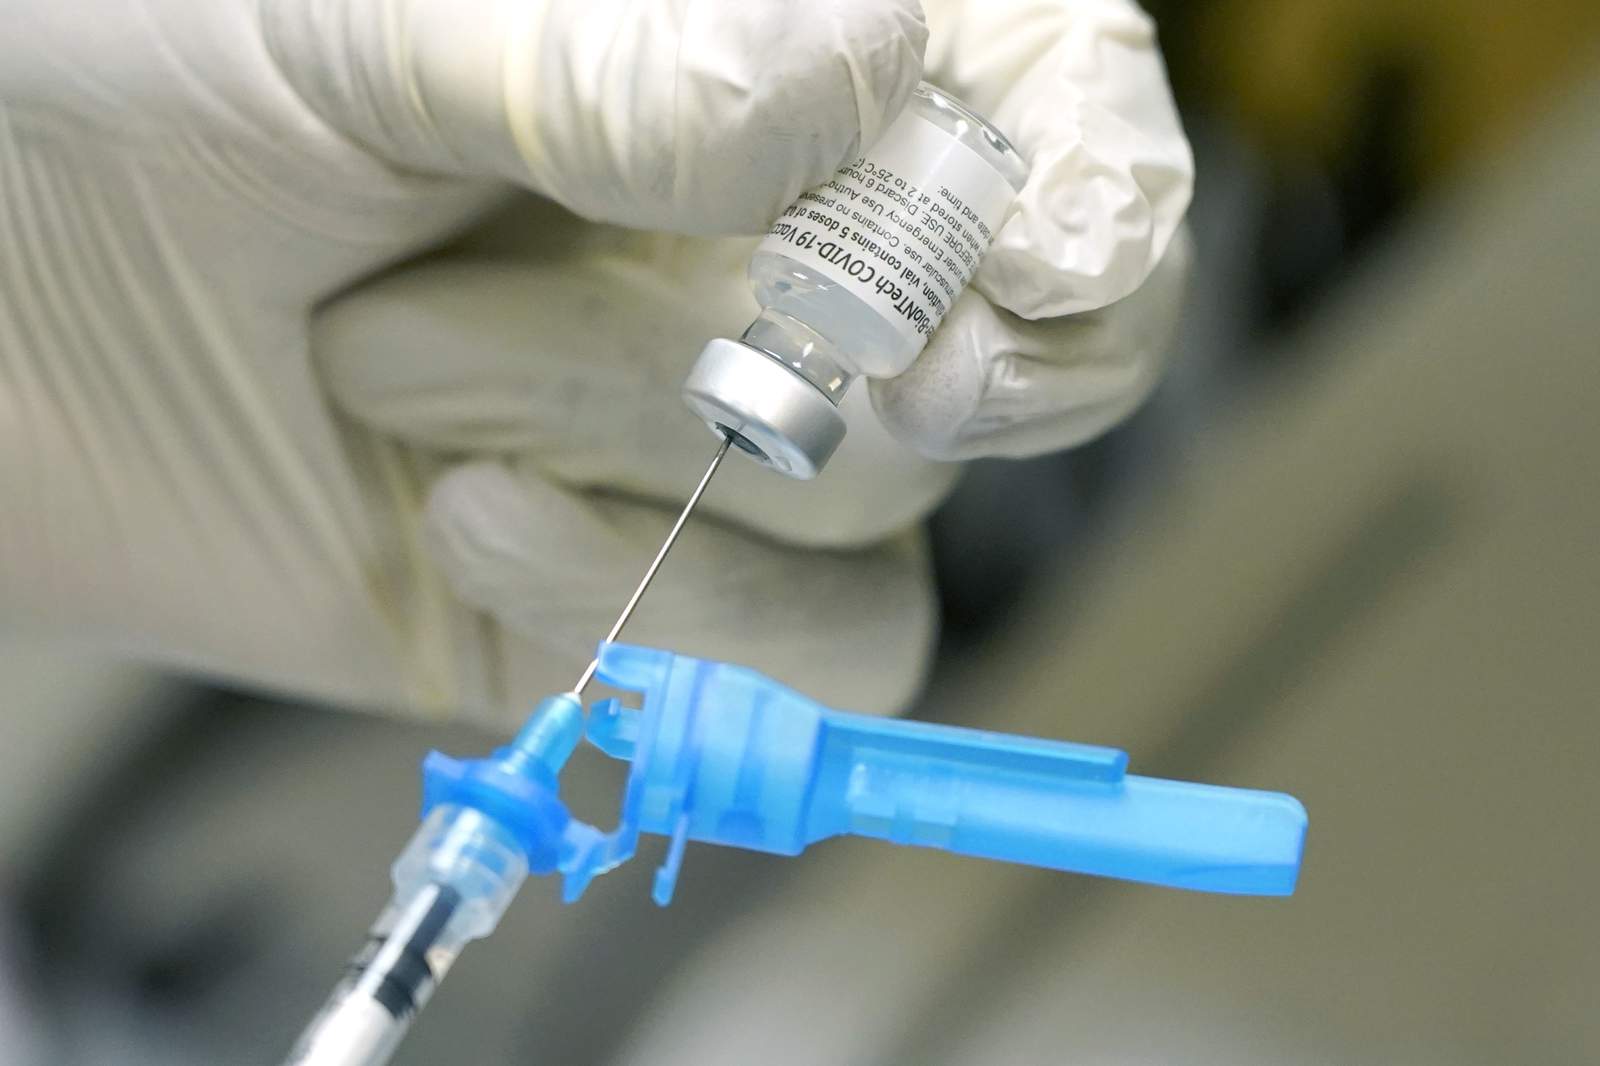 Michigan Medicine will begin vaccinating limited number of adults 65 and older this week